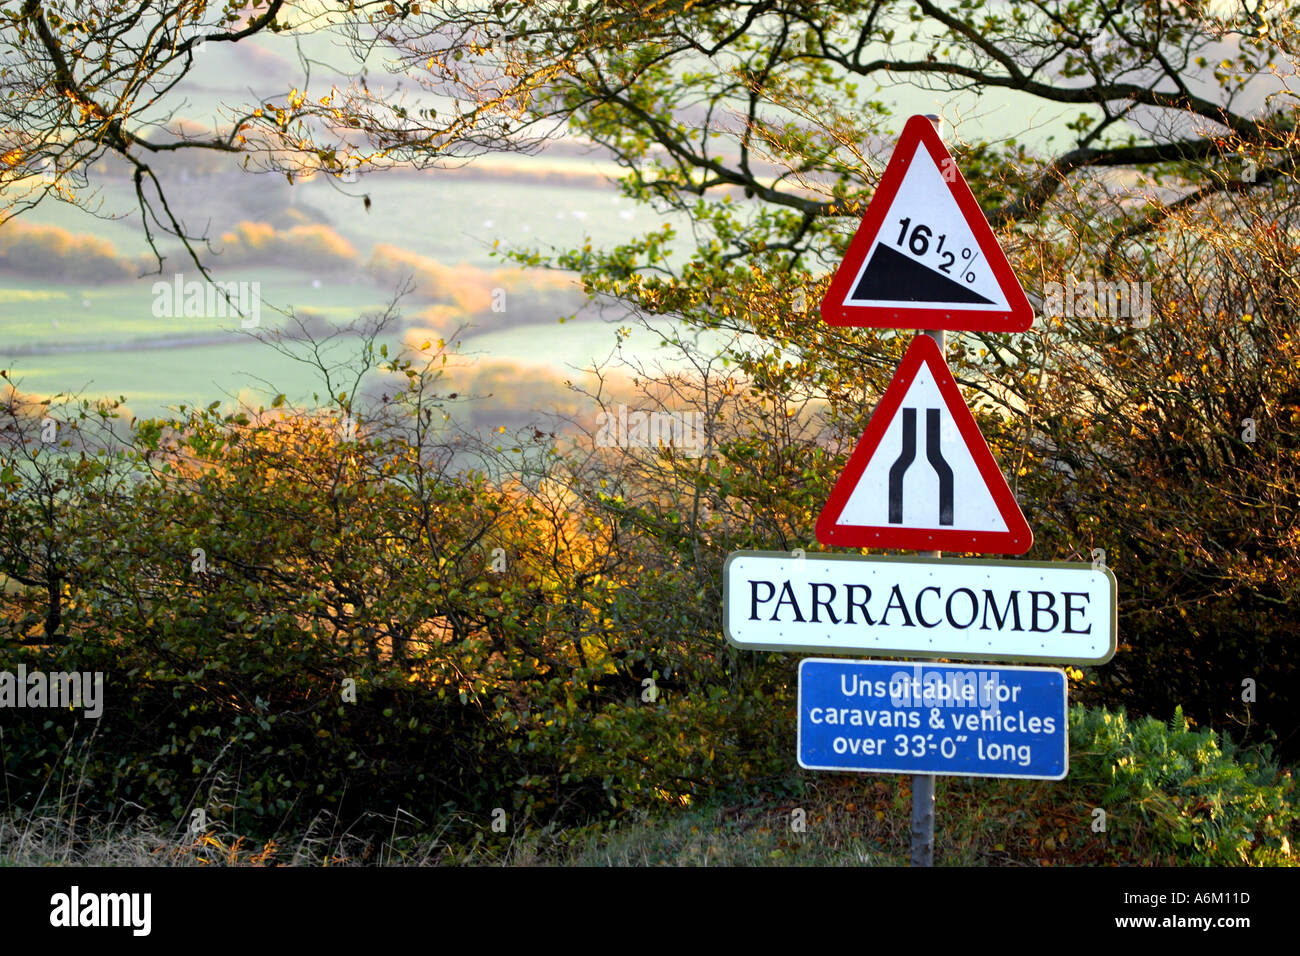 Parracombe village and warning sign North Devon England Stock Photo